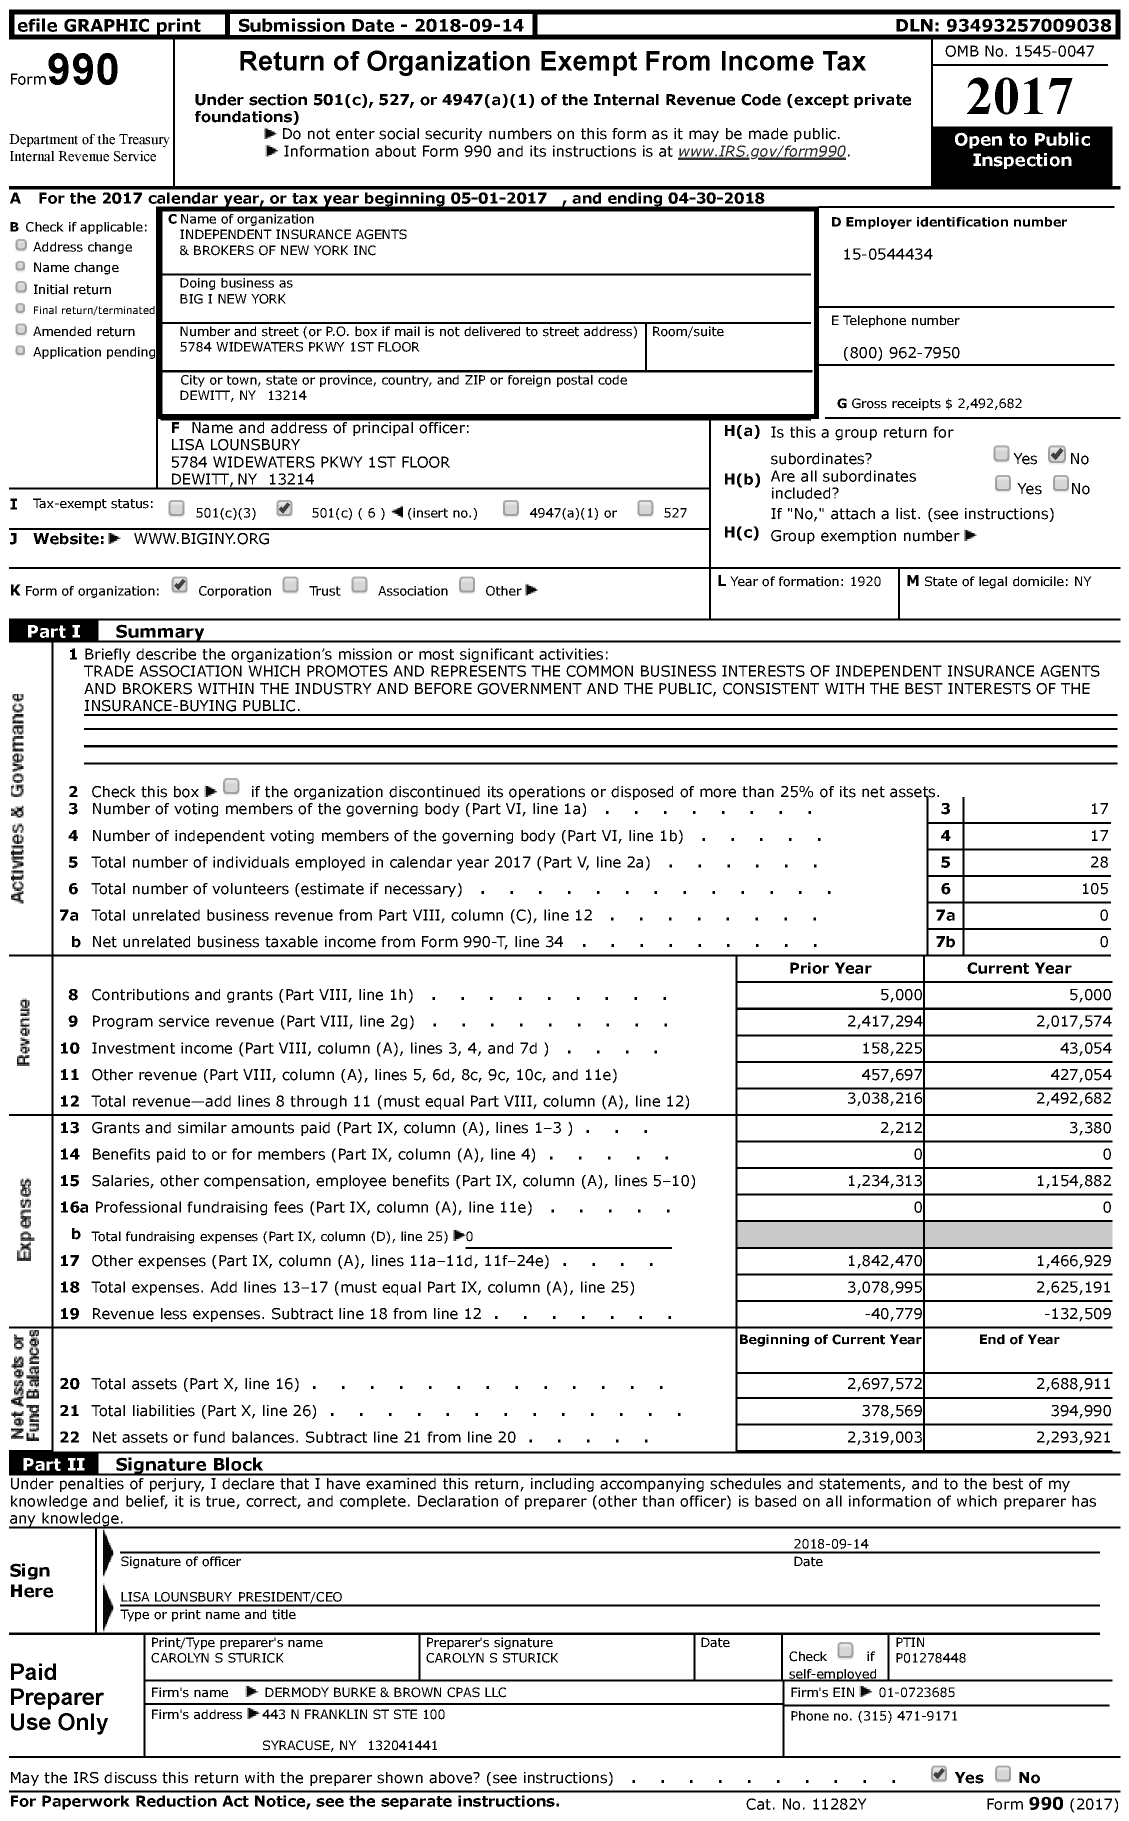 Image of first page of 2017 Form 990 for Big Insurance New York